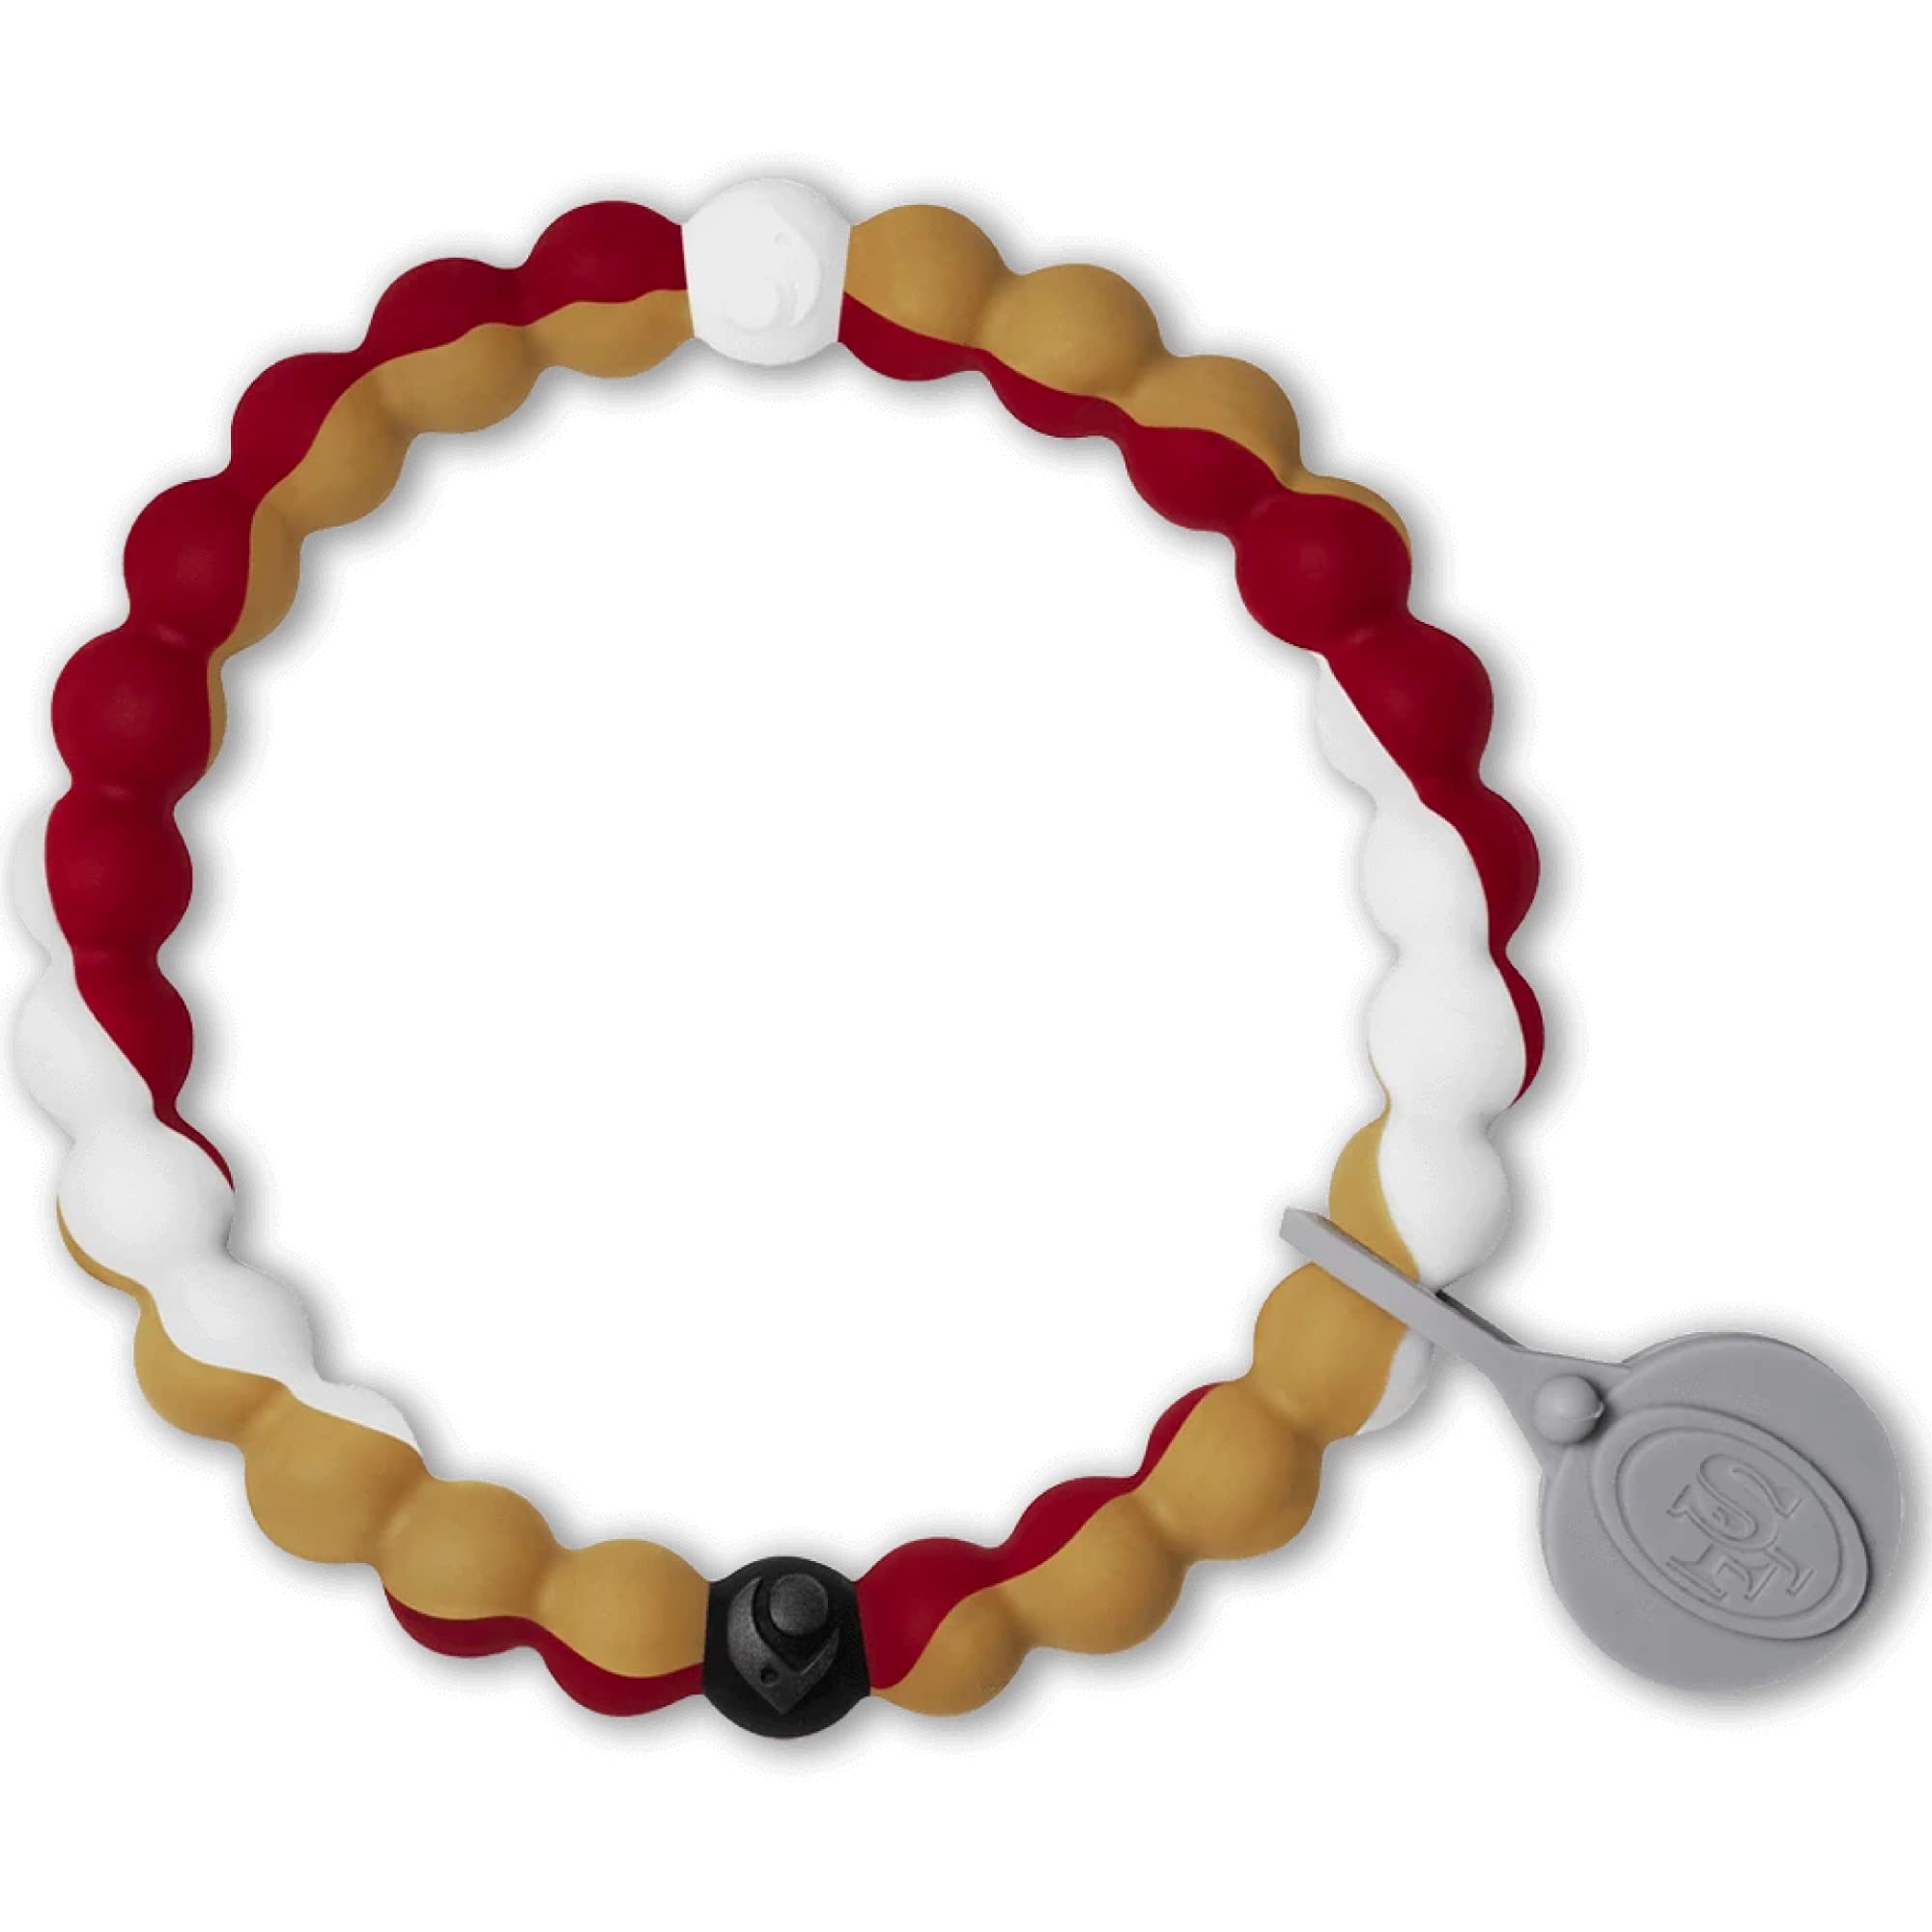 Lokai Silicone Beaded Bracelet for Men Women, NFL Football collection - San Francisco 49ers, Large - Silicone Jewelry Fashion Br